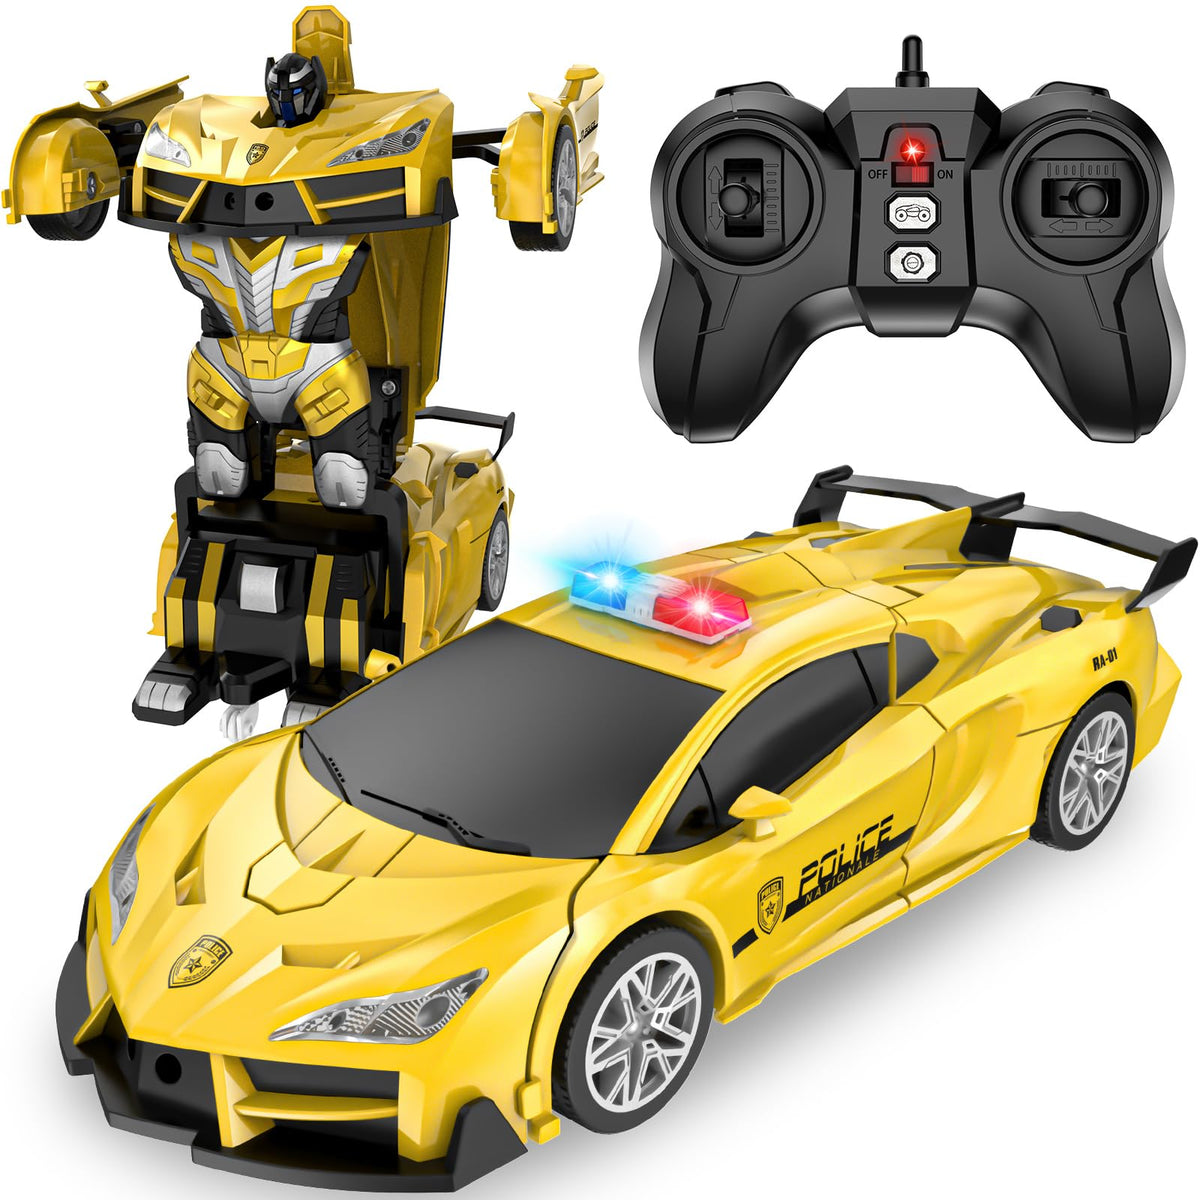 LNNKINE Remote Control Car, Transform Robot RC Cars, 2.4Ghz Transforming Police Car Toy with LED Light, One-Button Deformation & Rotating Drifting, Toys for 5+ Year Boys/Girls